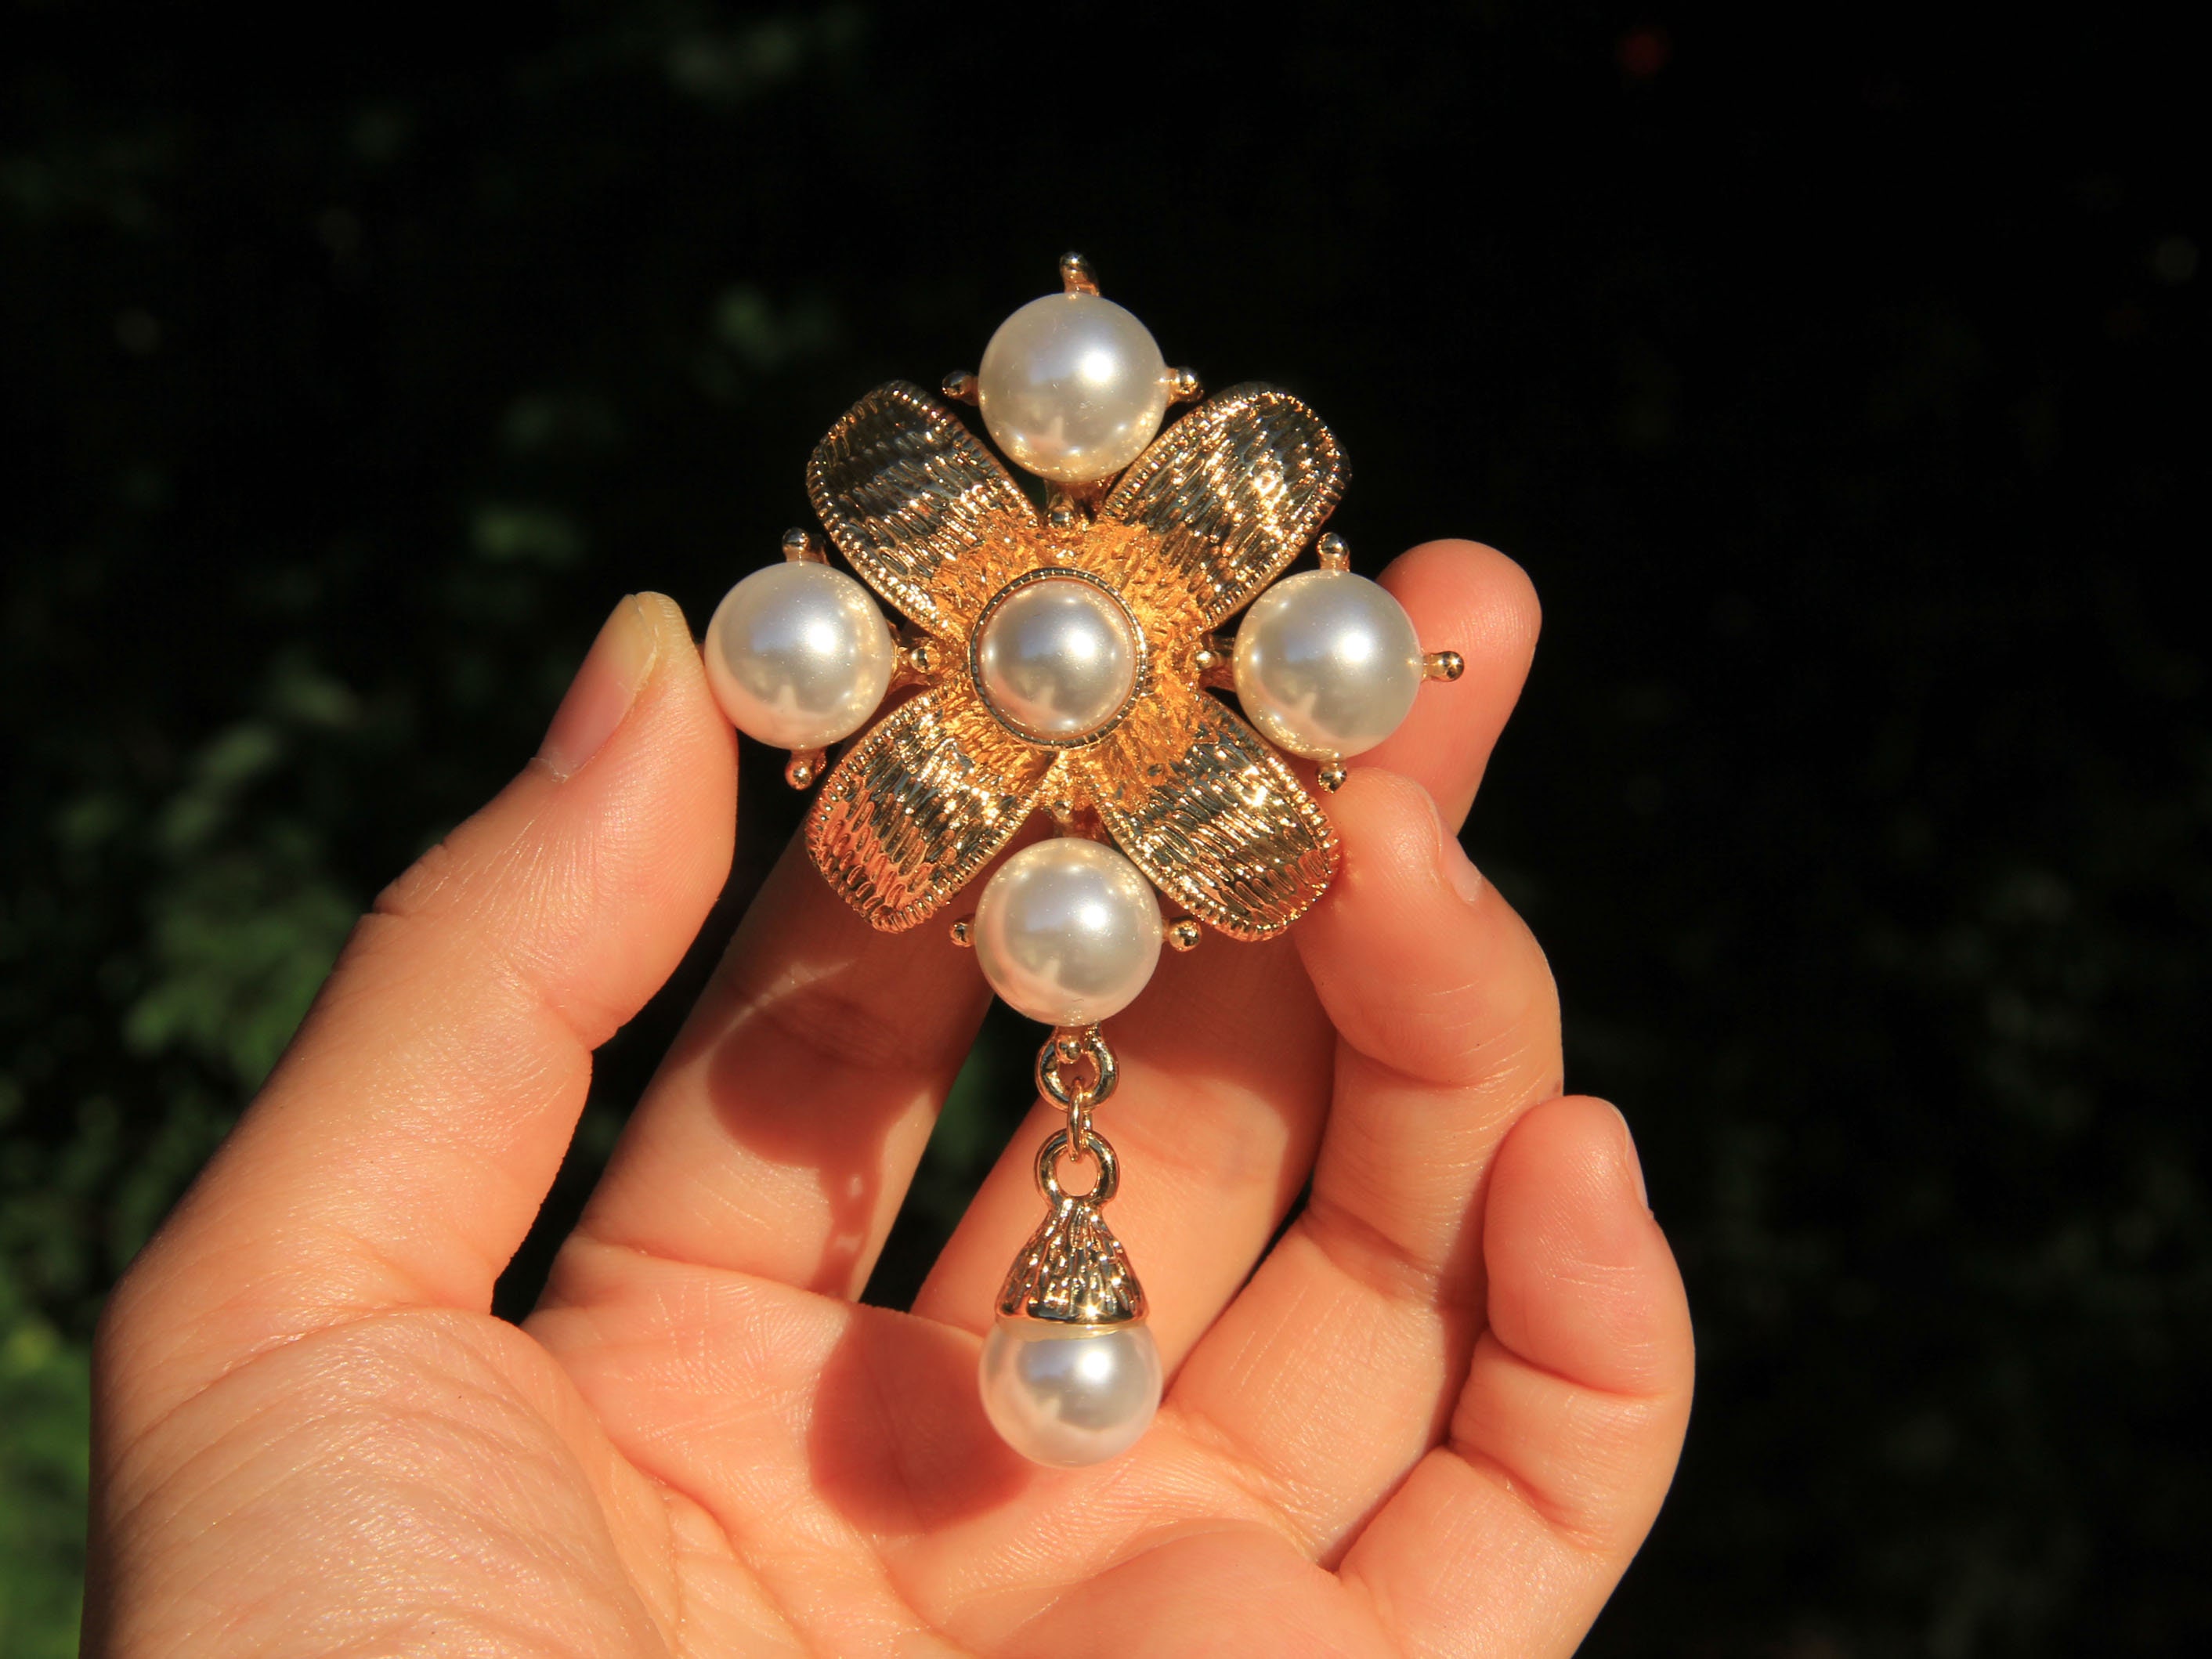 Baroque Style Brooch Golden Pearl White Pendant -  UK